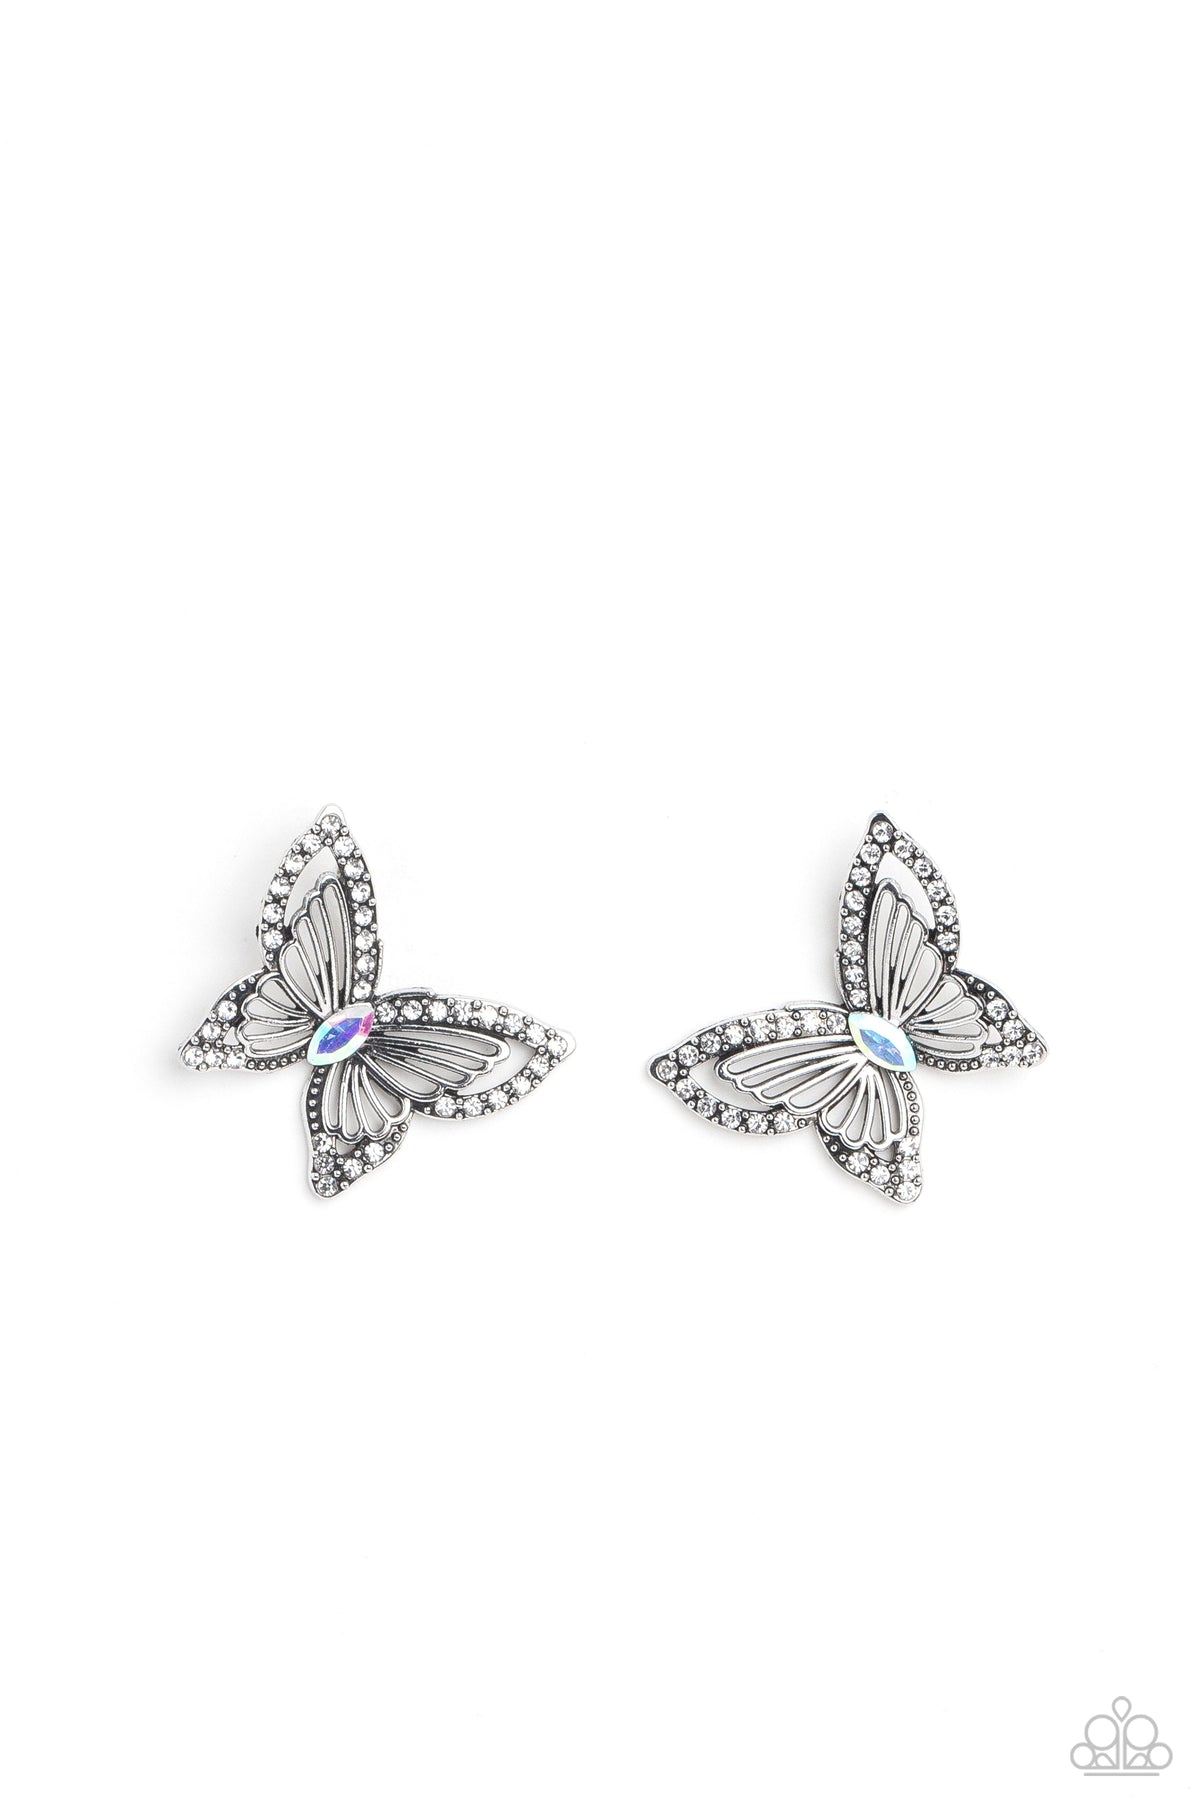 Wispy Wings Multi &amp; White Gem Butterfly Earrings - Paparazzi Accessories- lightbox - CarasShop.com - $5 Jewelry by Cara Jewels